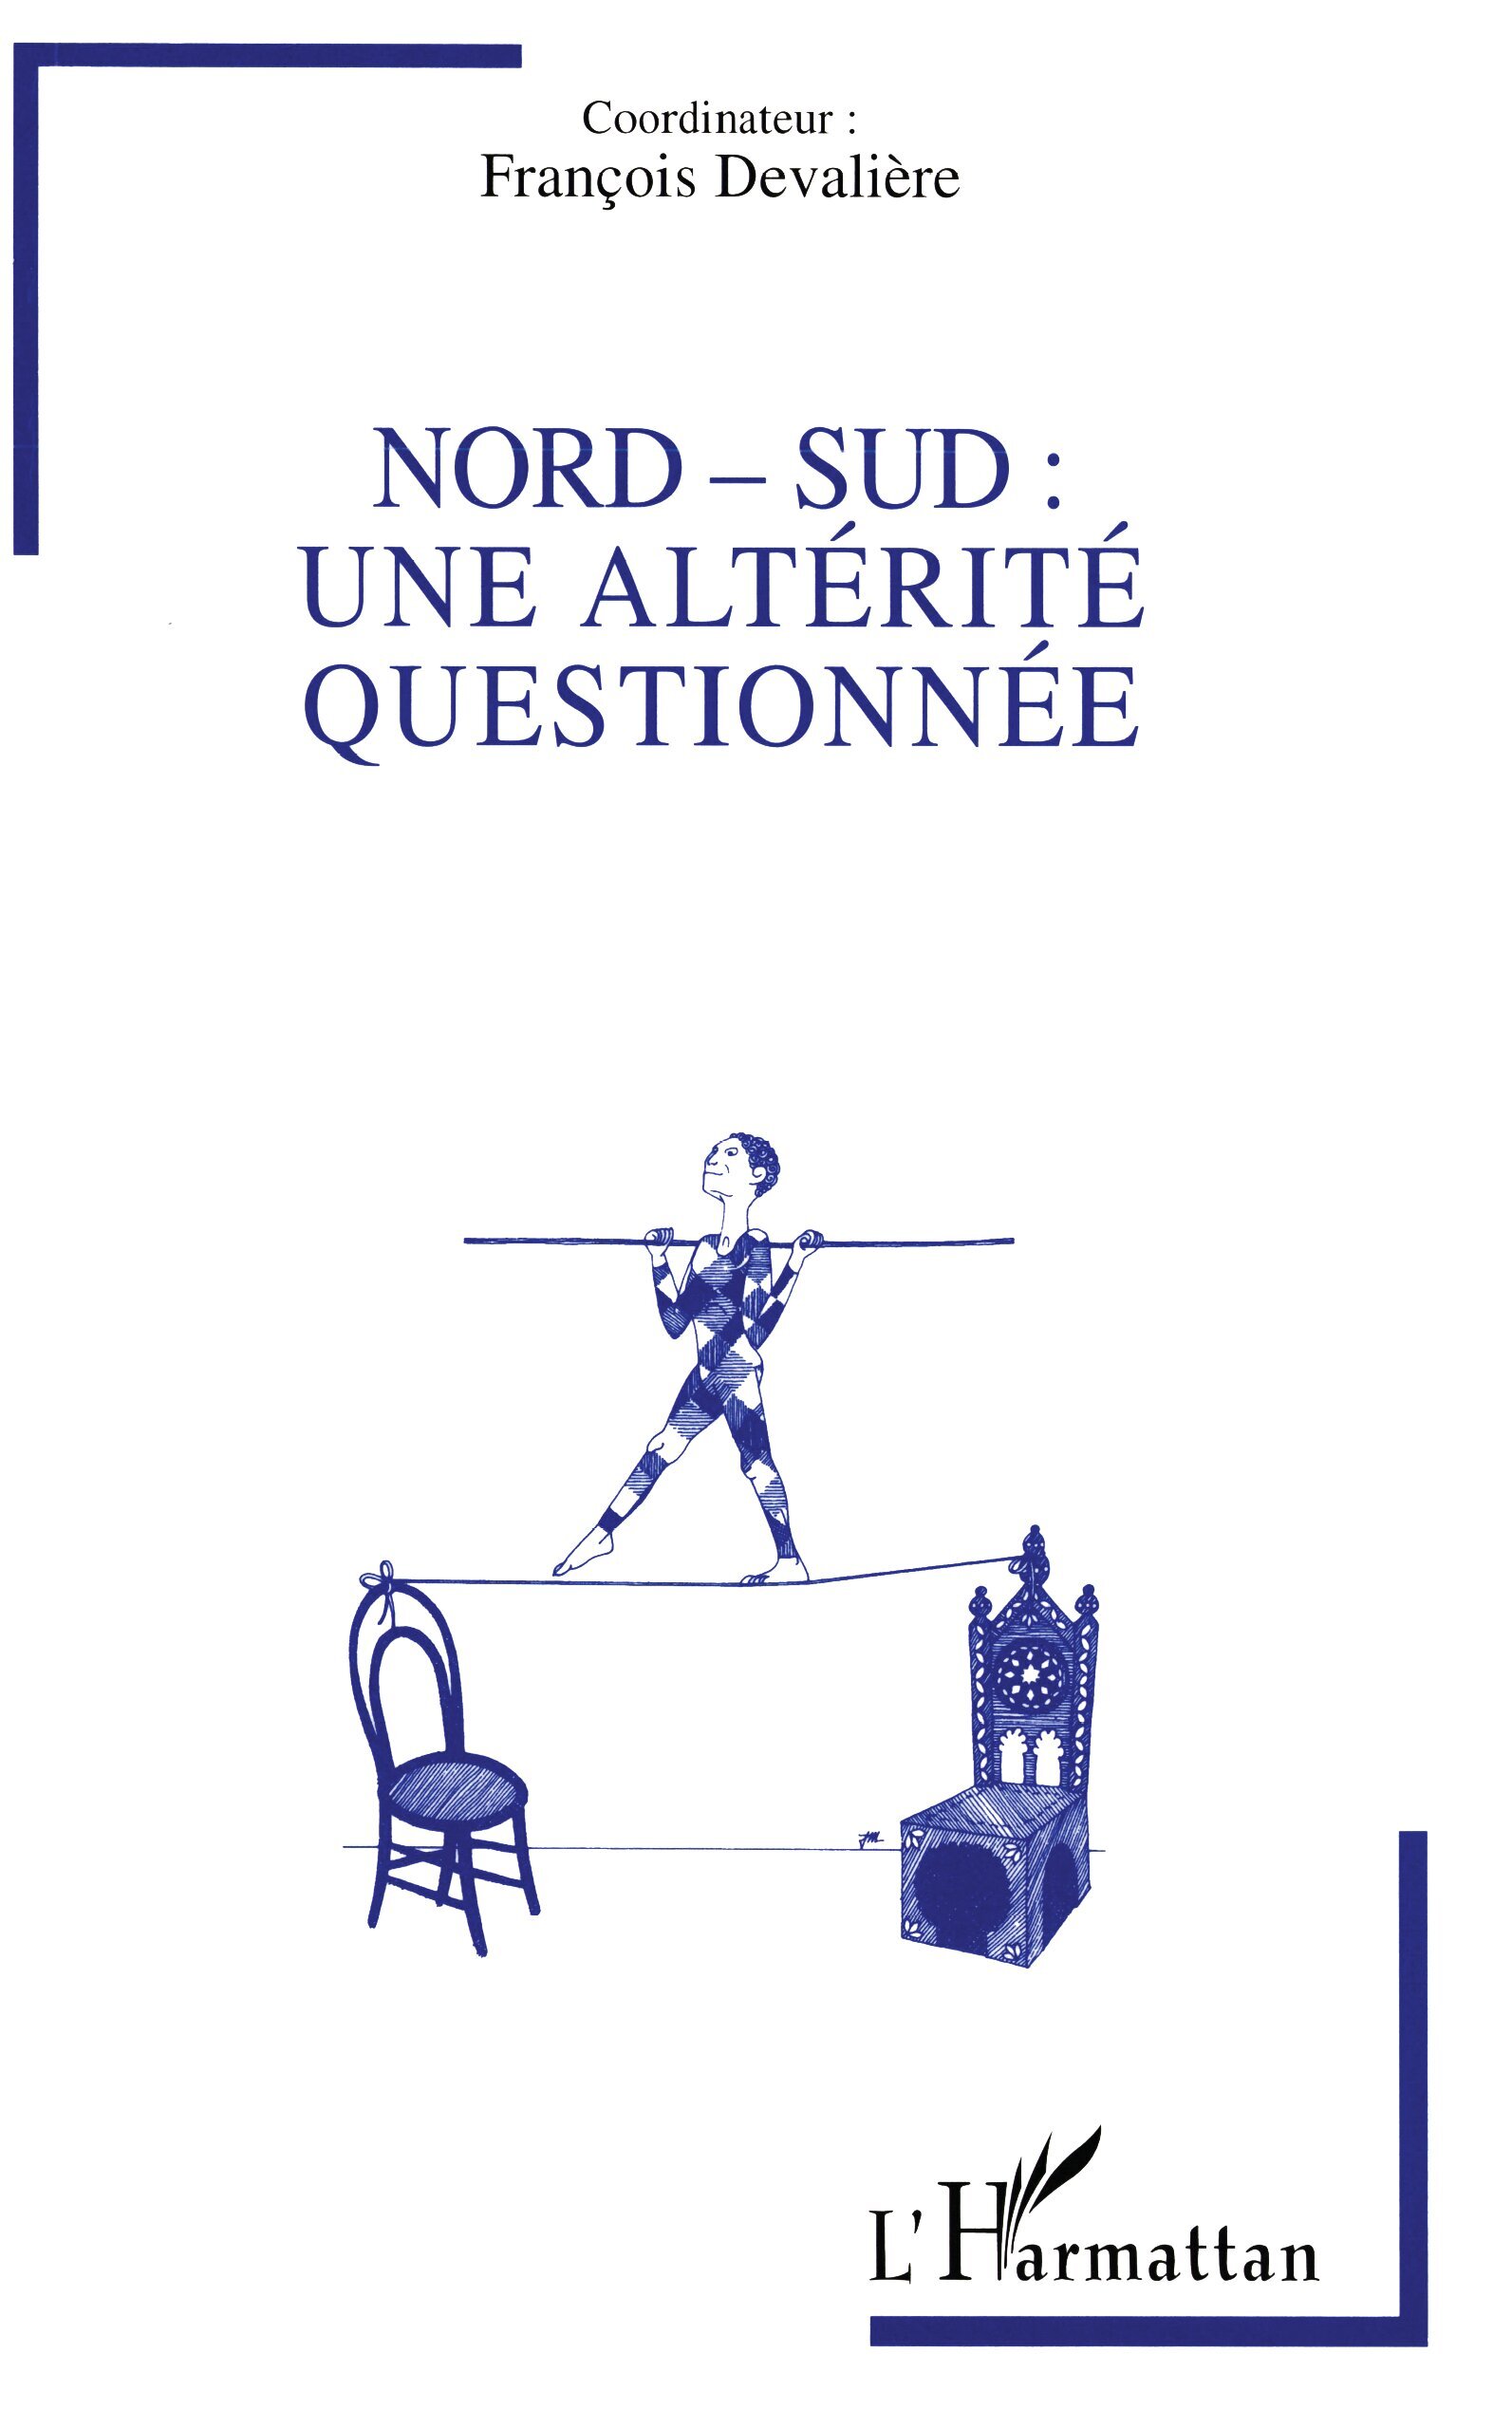 NORD-SUD : UNE ALTERITE QUESTIONNEE (9782738455529-front-cover)